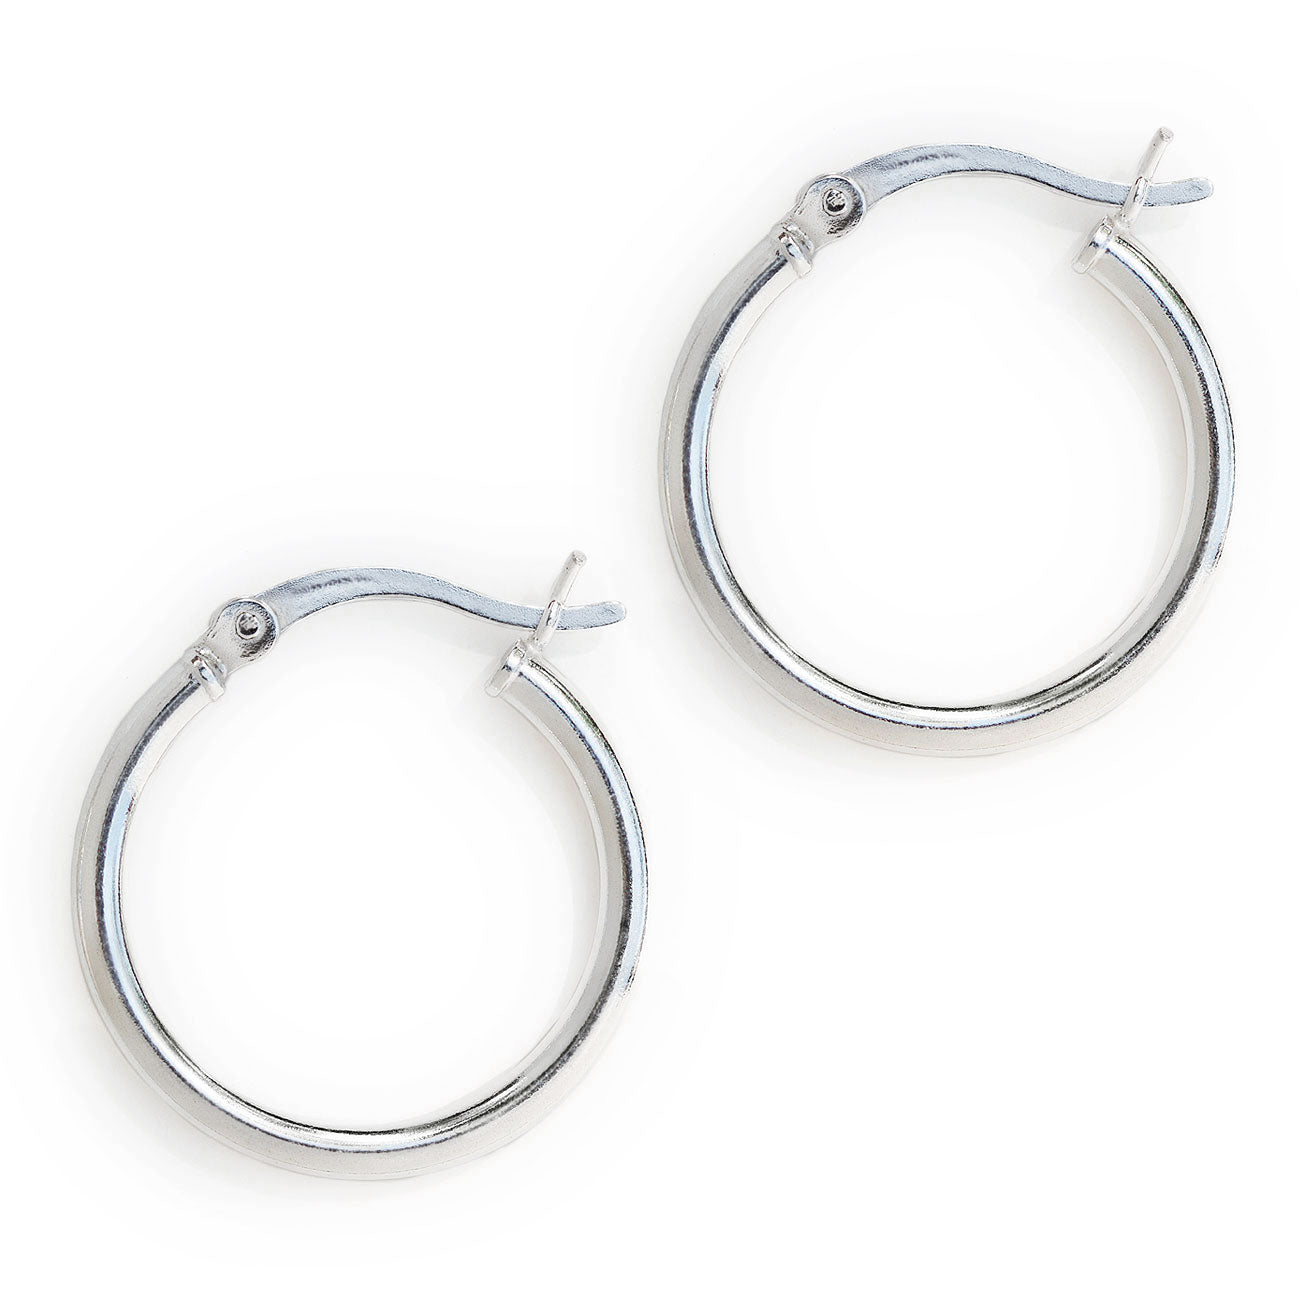 Amazon.com: Sterling Silver Dangle Earrings for Women- Small Silver Chunky  Earrings with Leverback - Simple Circle Designer Dangling Earrings :  Handmade Products